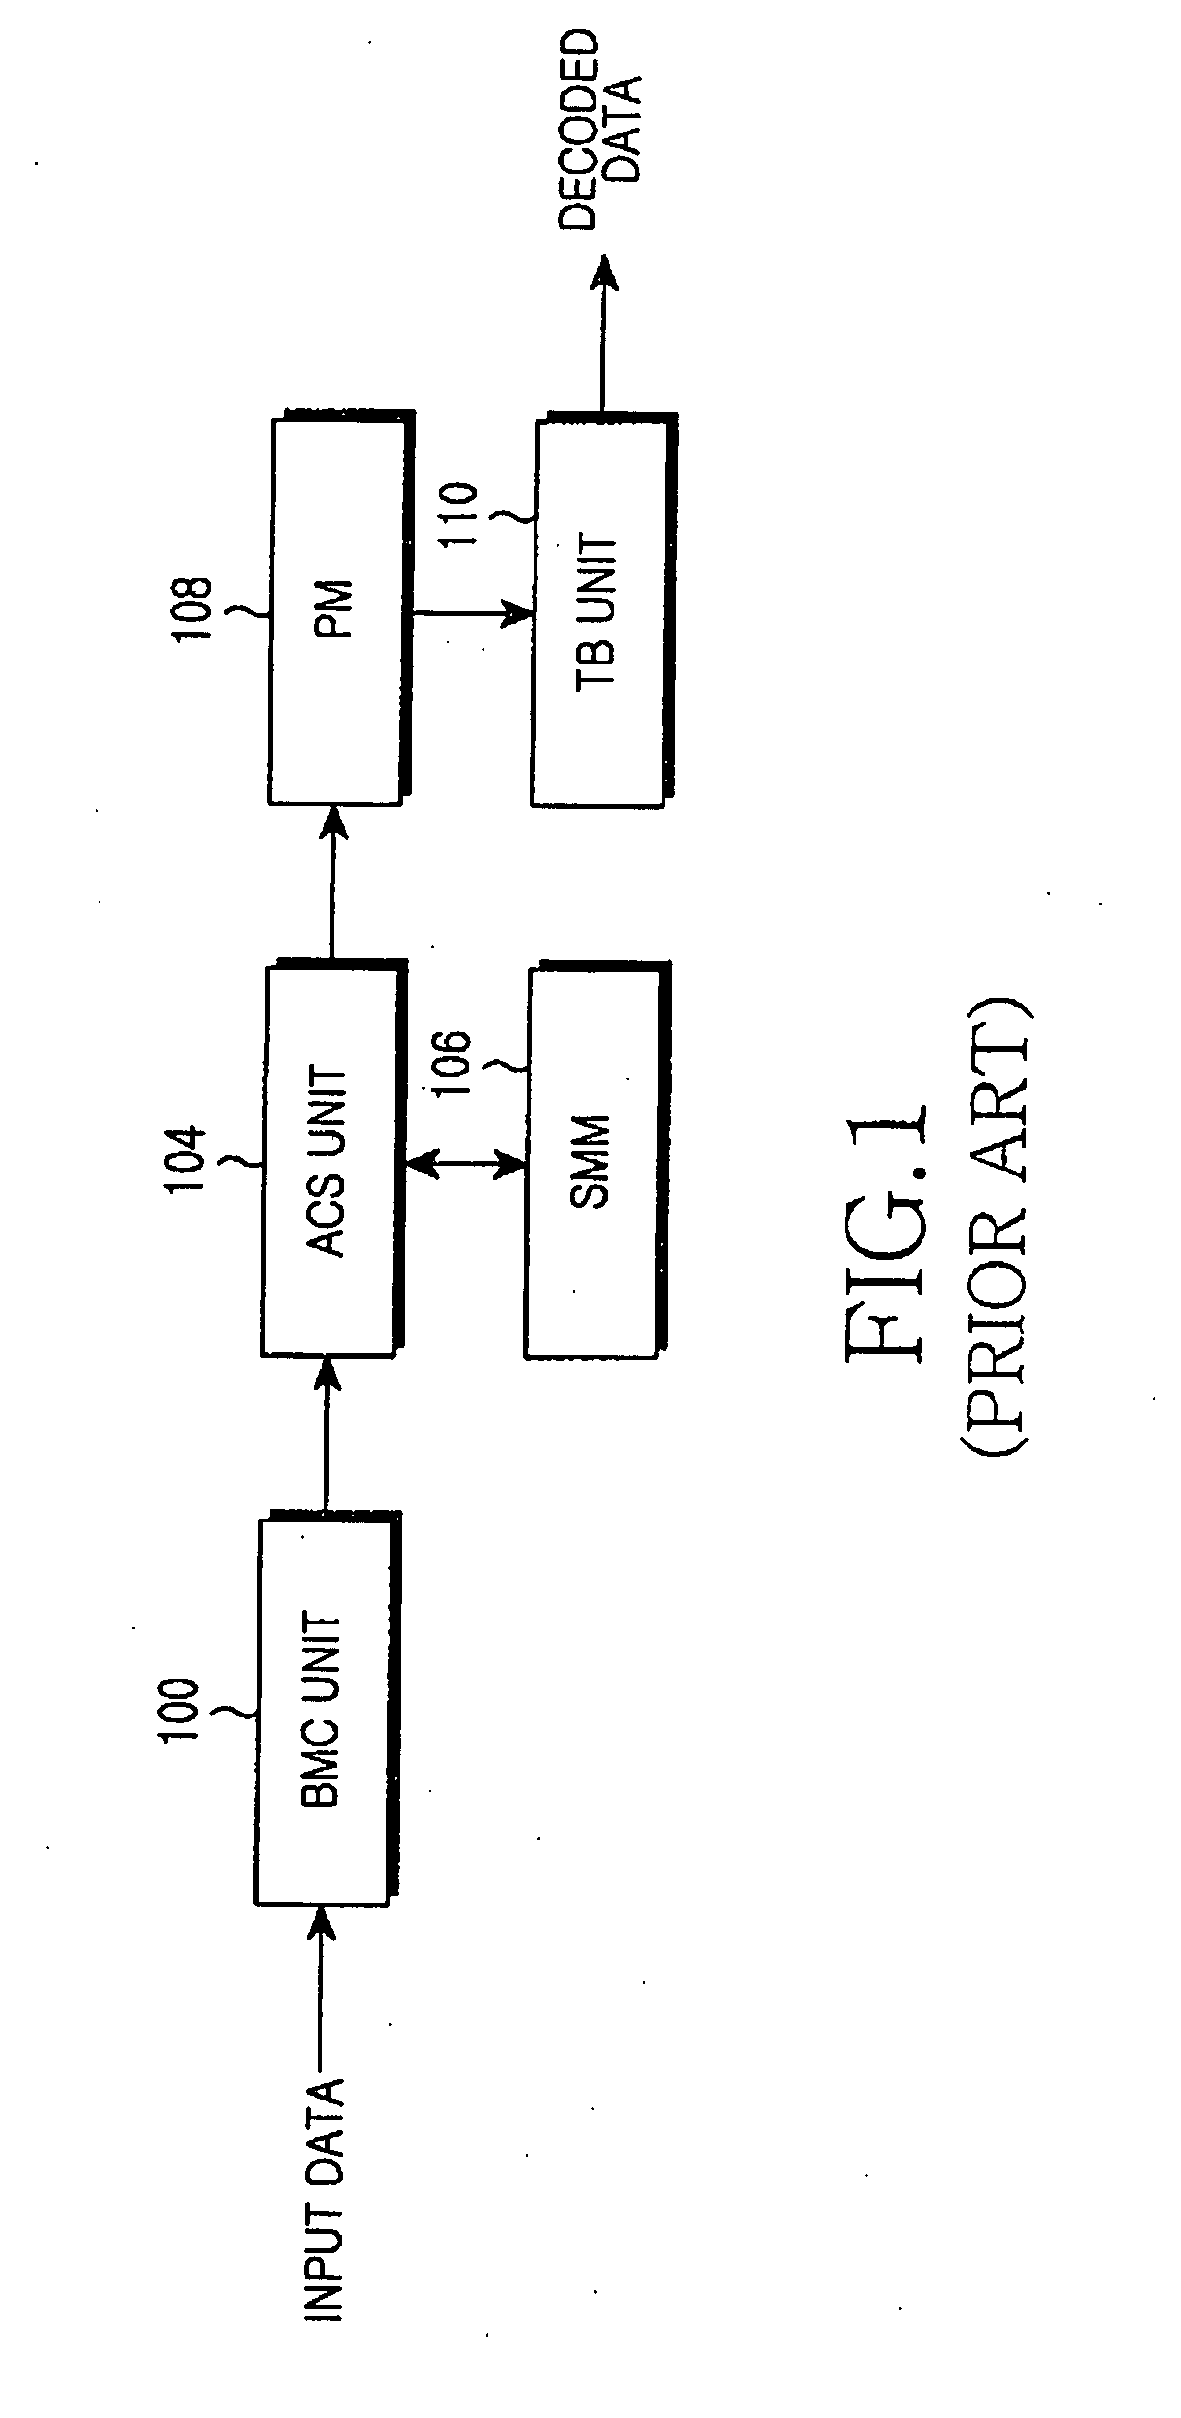 Decoder and decoding method in consideration of input message characteristics